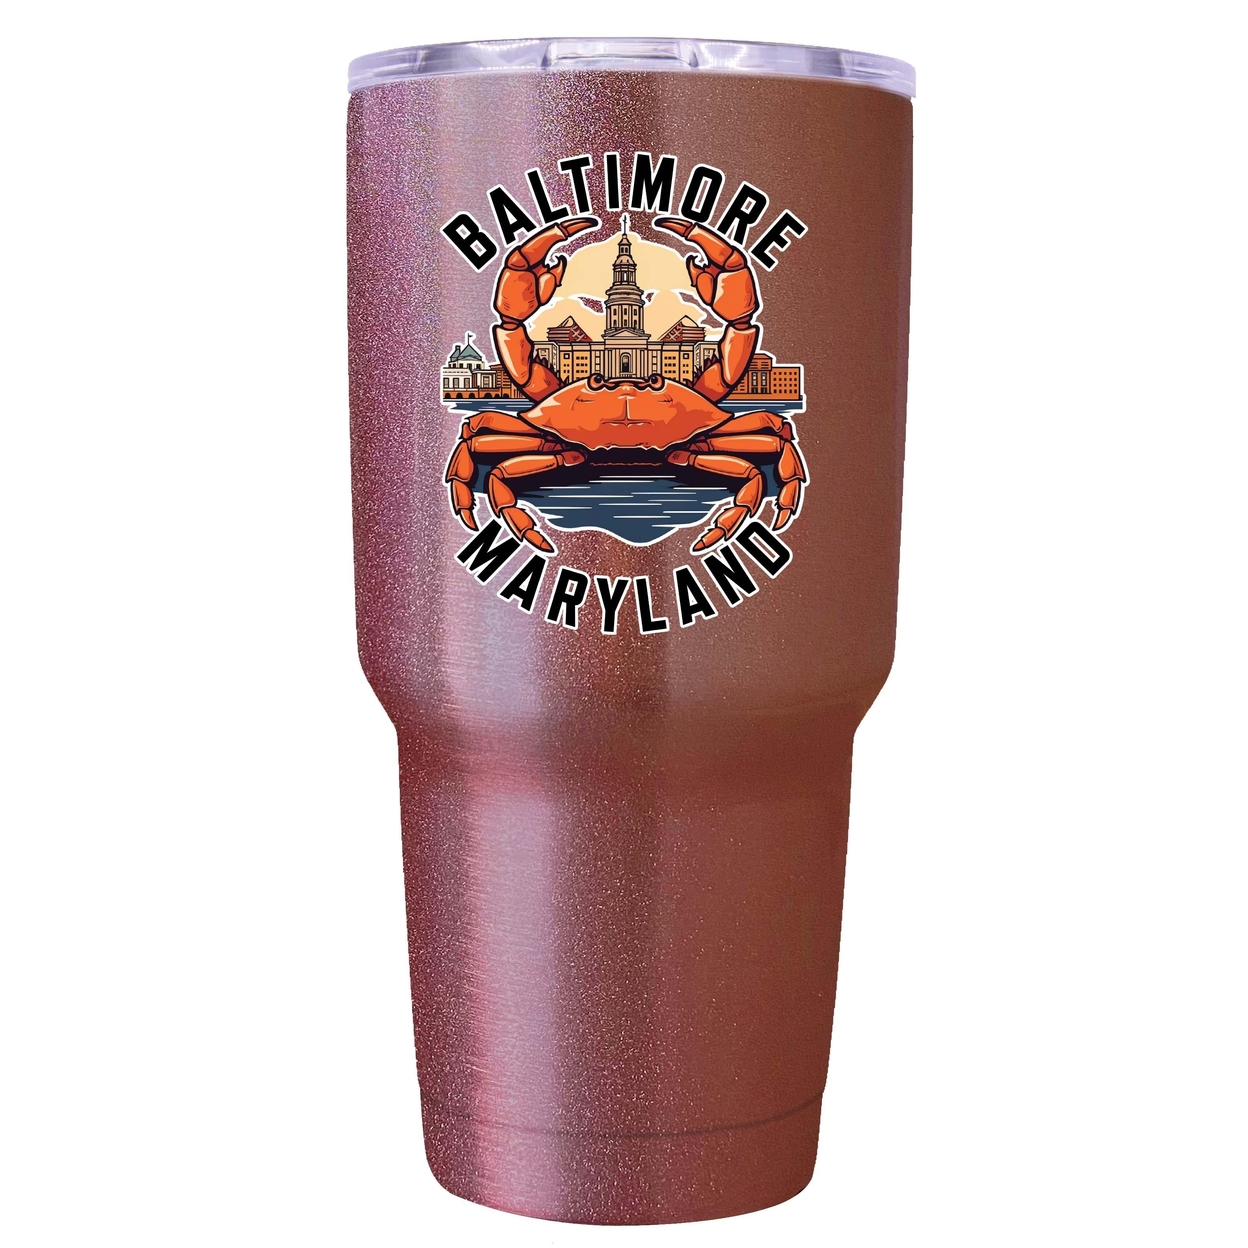 Baltimore Maryland D Souvenir 24 Oz Insulated Tumbler - Rose Gold,,4-Pack